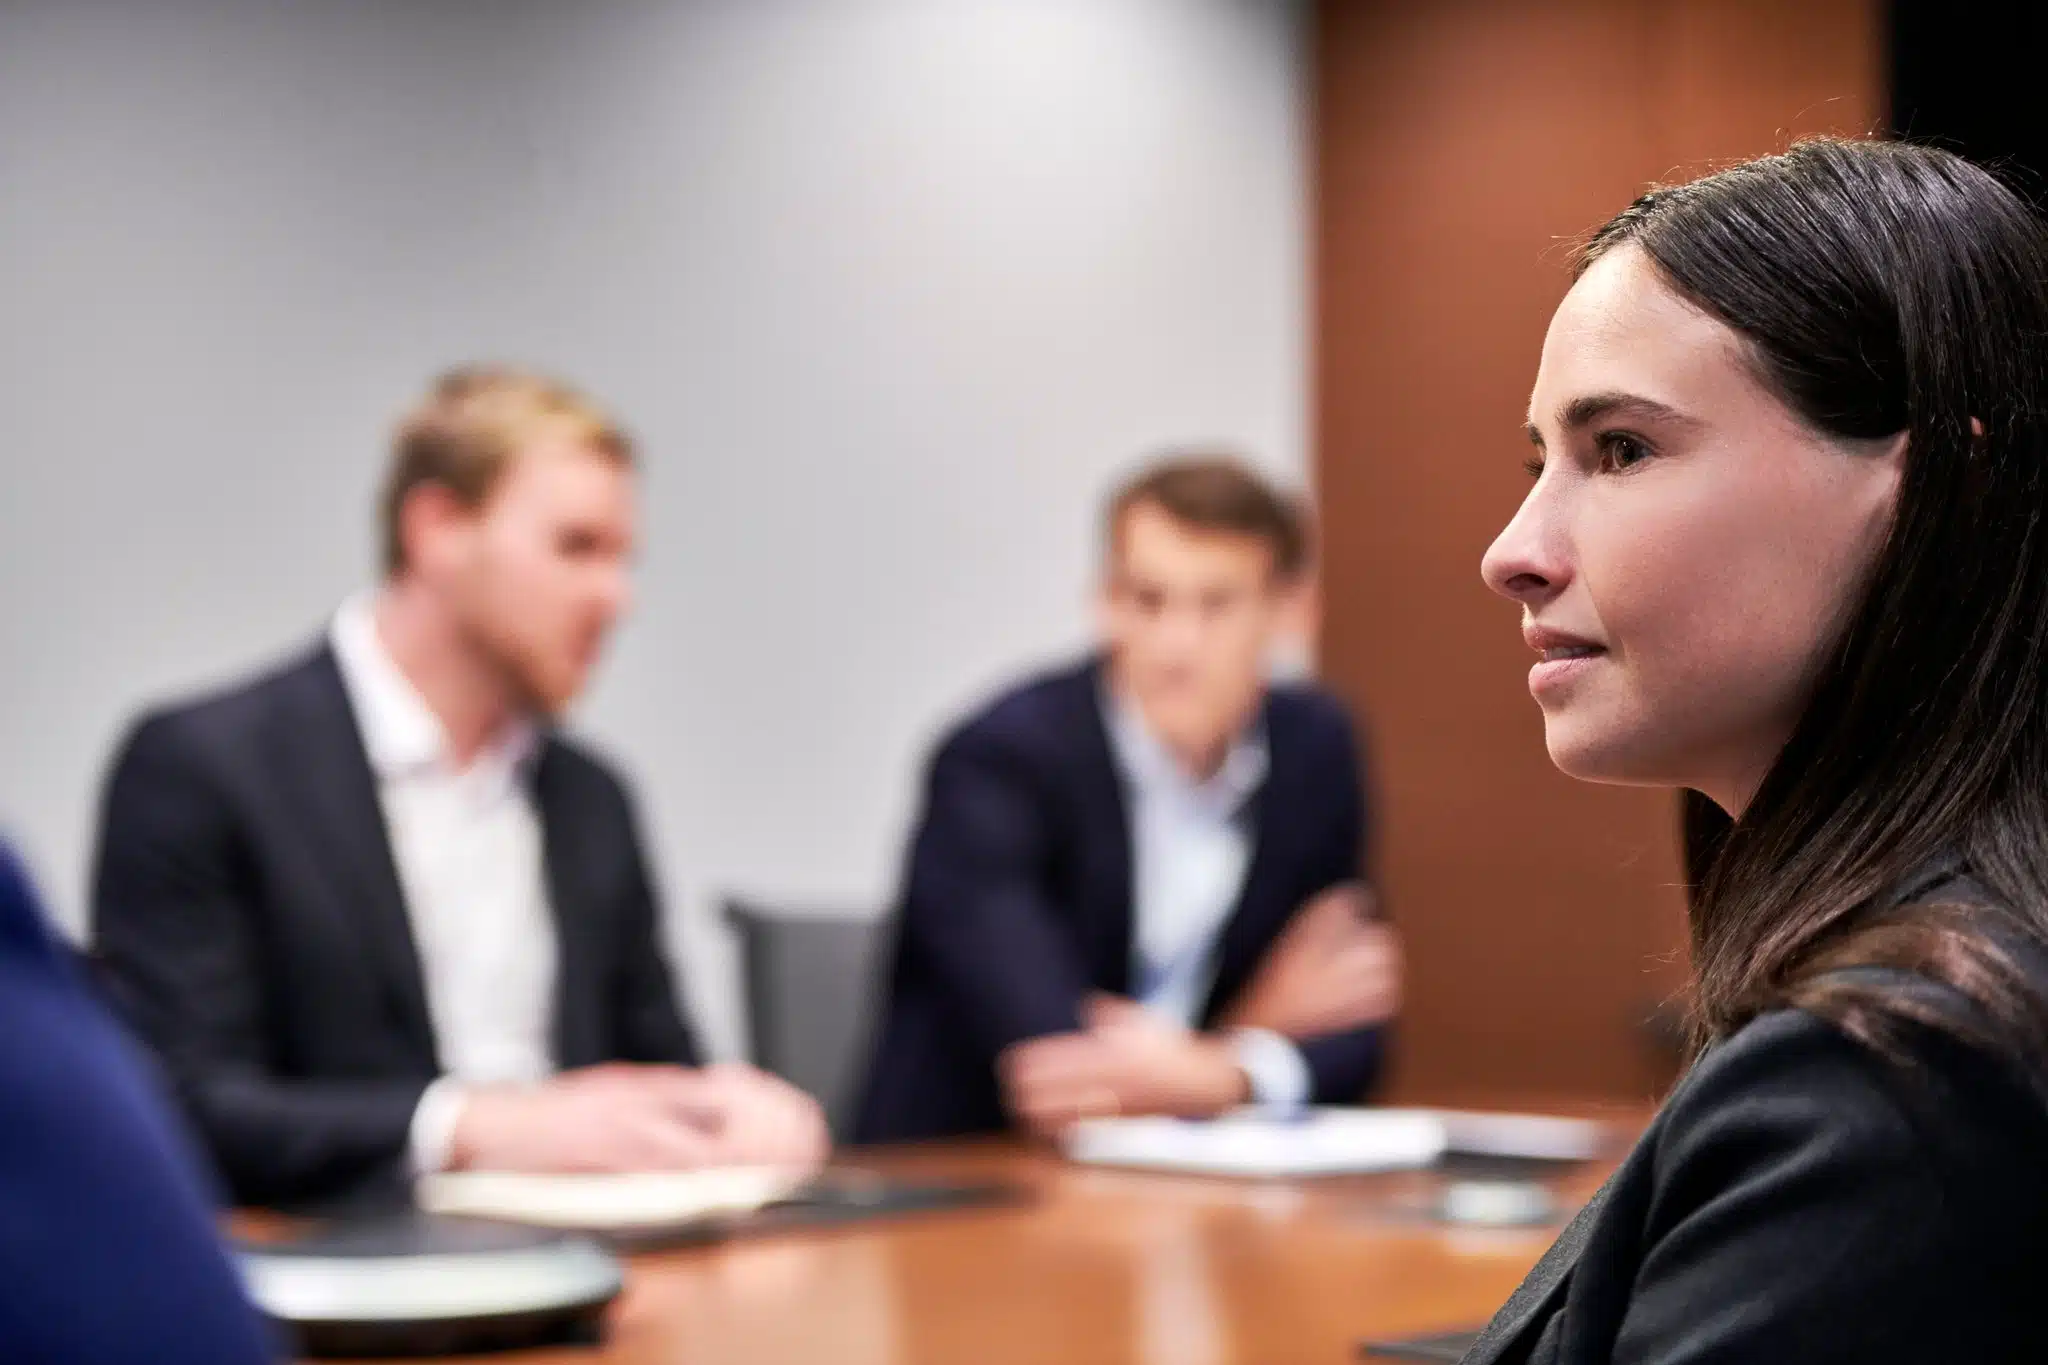 Female employee in focus, paying attention to presentation in a board room, with employees blurred in the background.